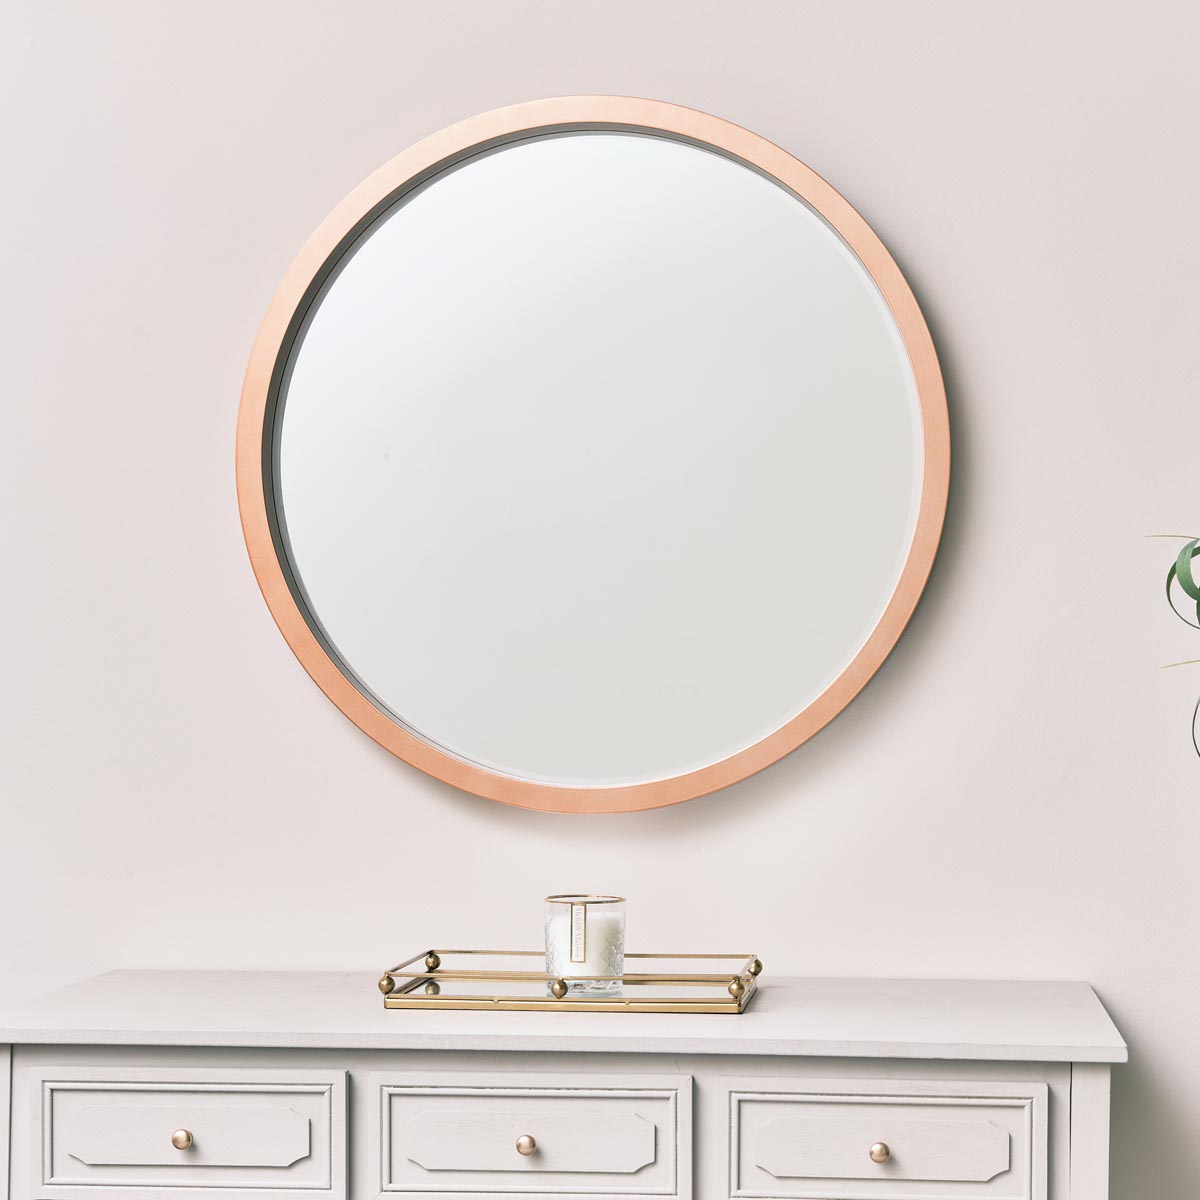 Large Round Copper Wall Mirror 80cm X - Round Copper Wall Shelf With Mirror